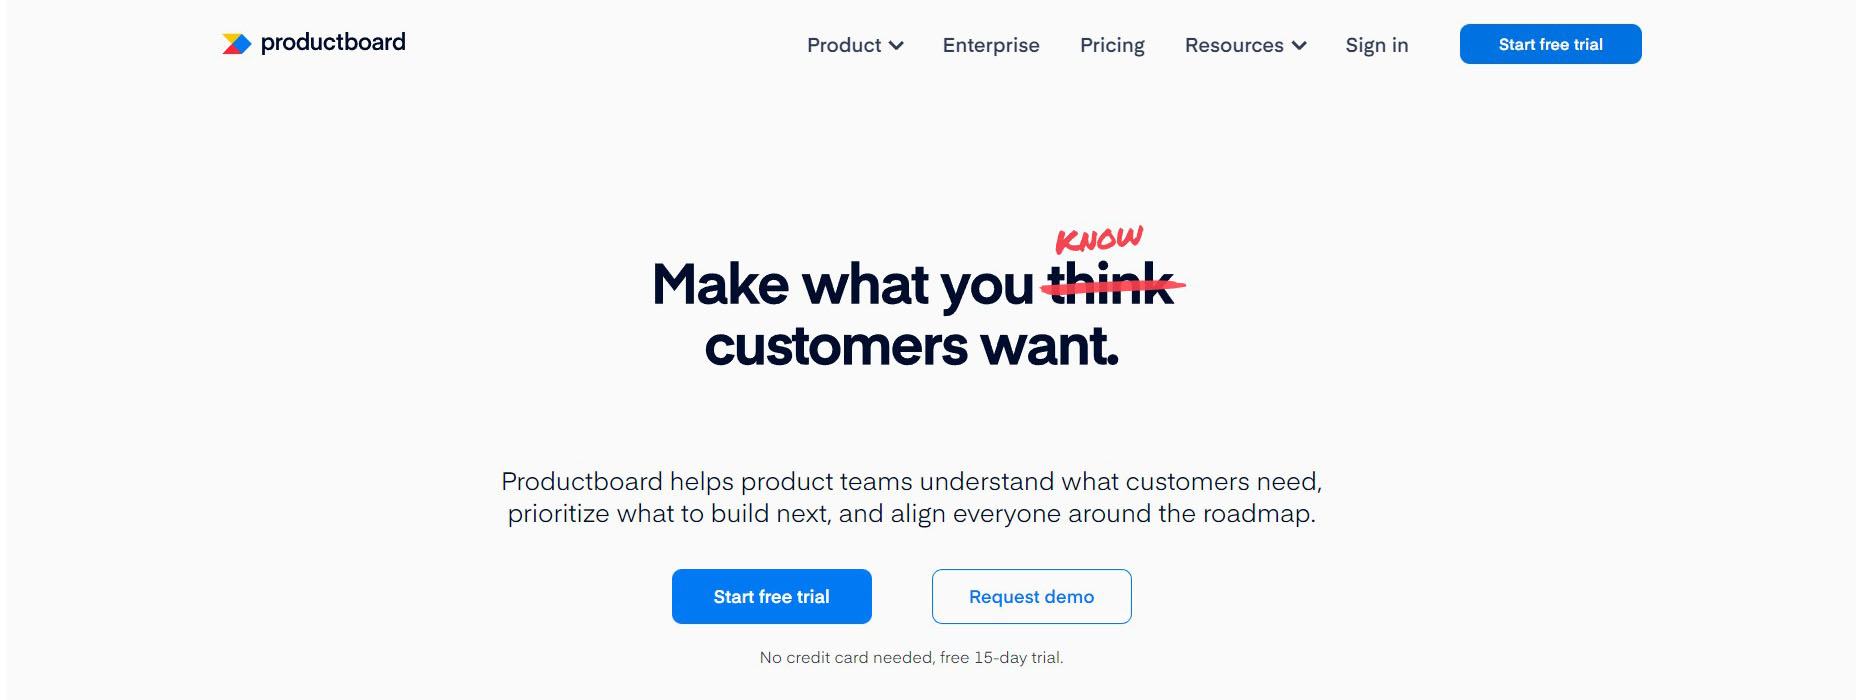 15 Best Product Management Tools for 2023 09